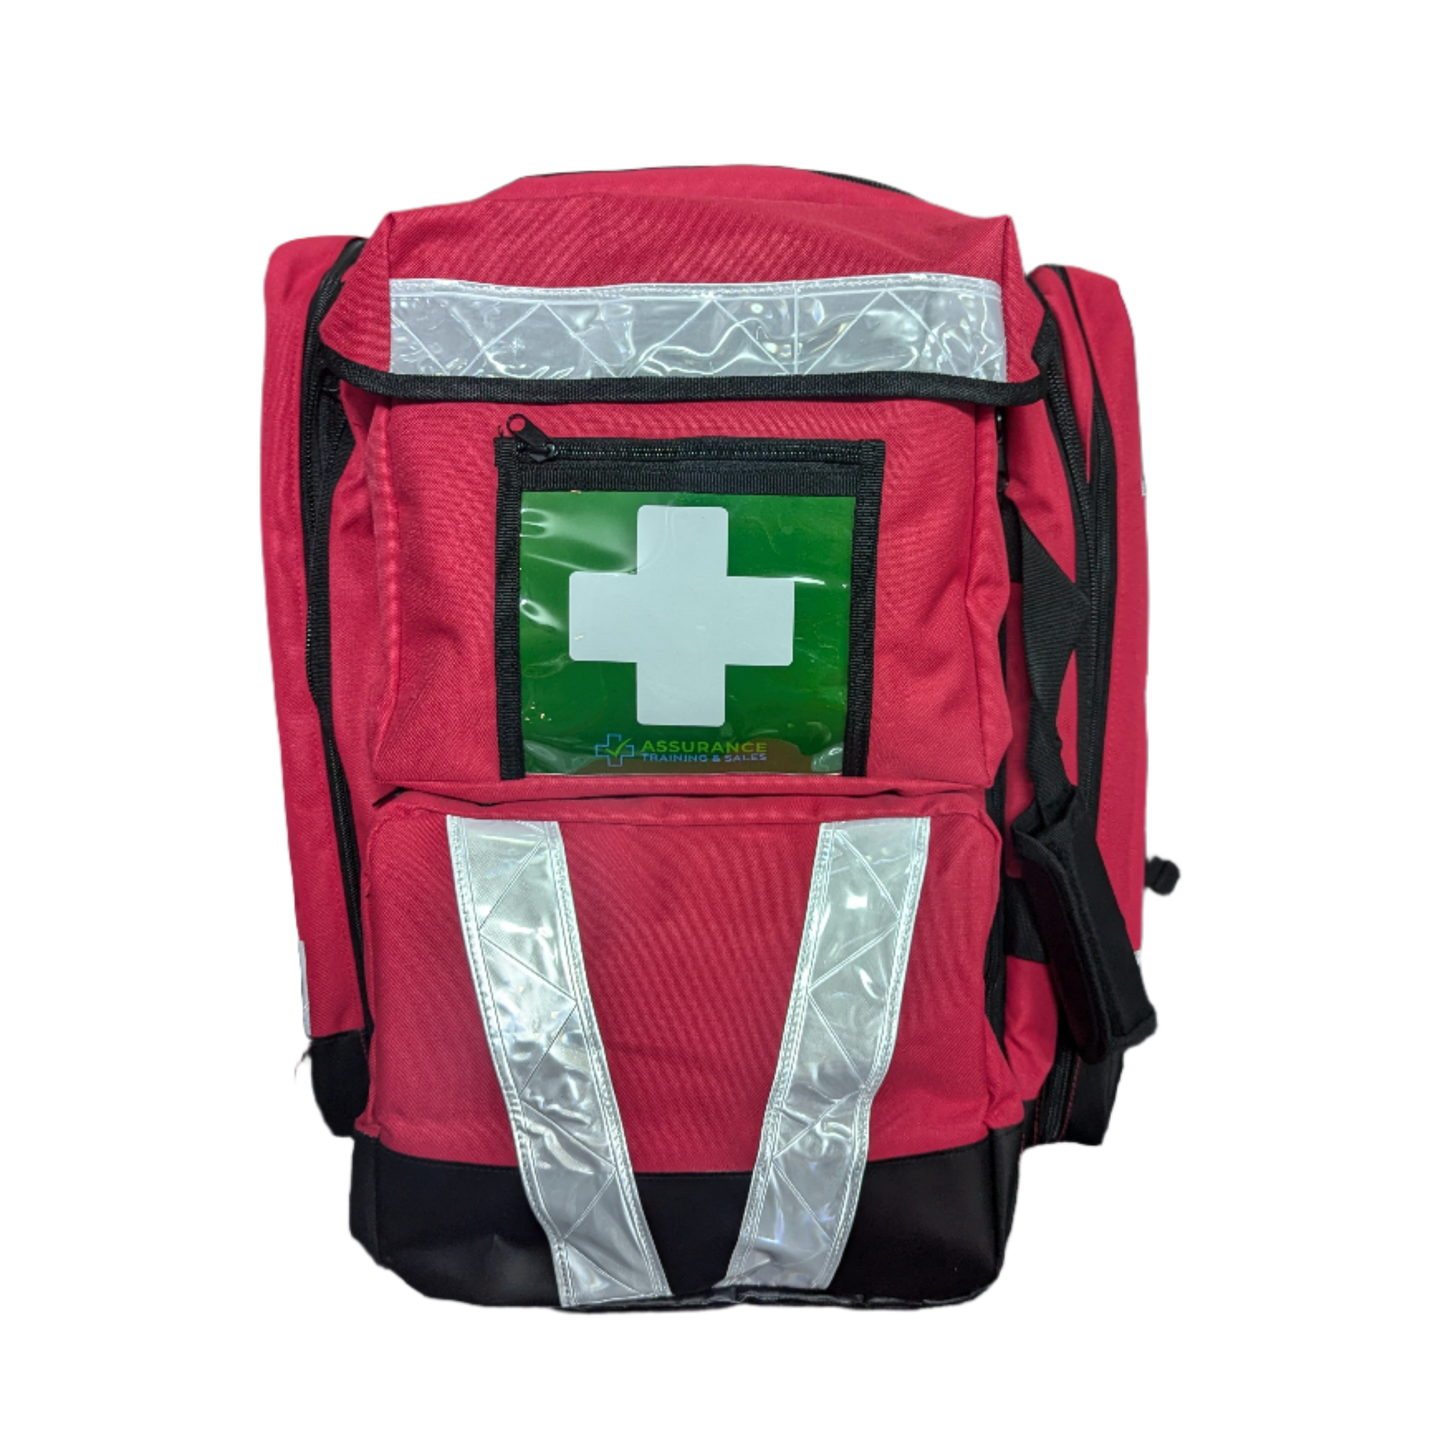 Premium First Responder First Aid Kit-Kits, Bags & Cabinets-Assurance Training and Sales-Assurance Training and Sales